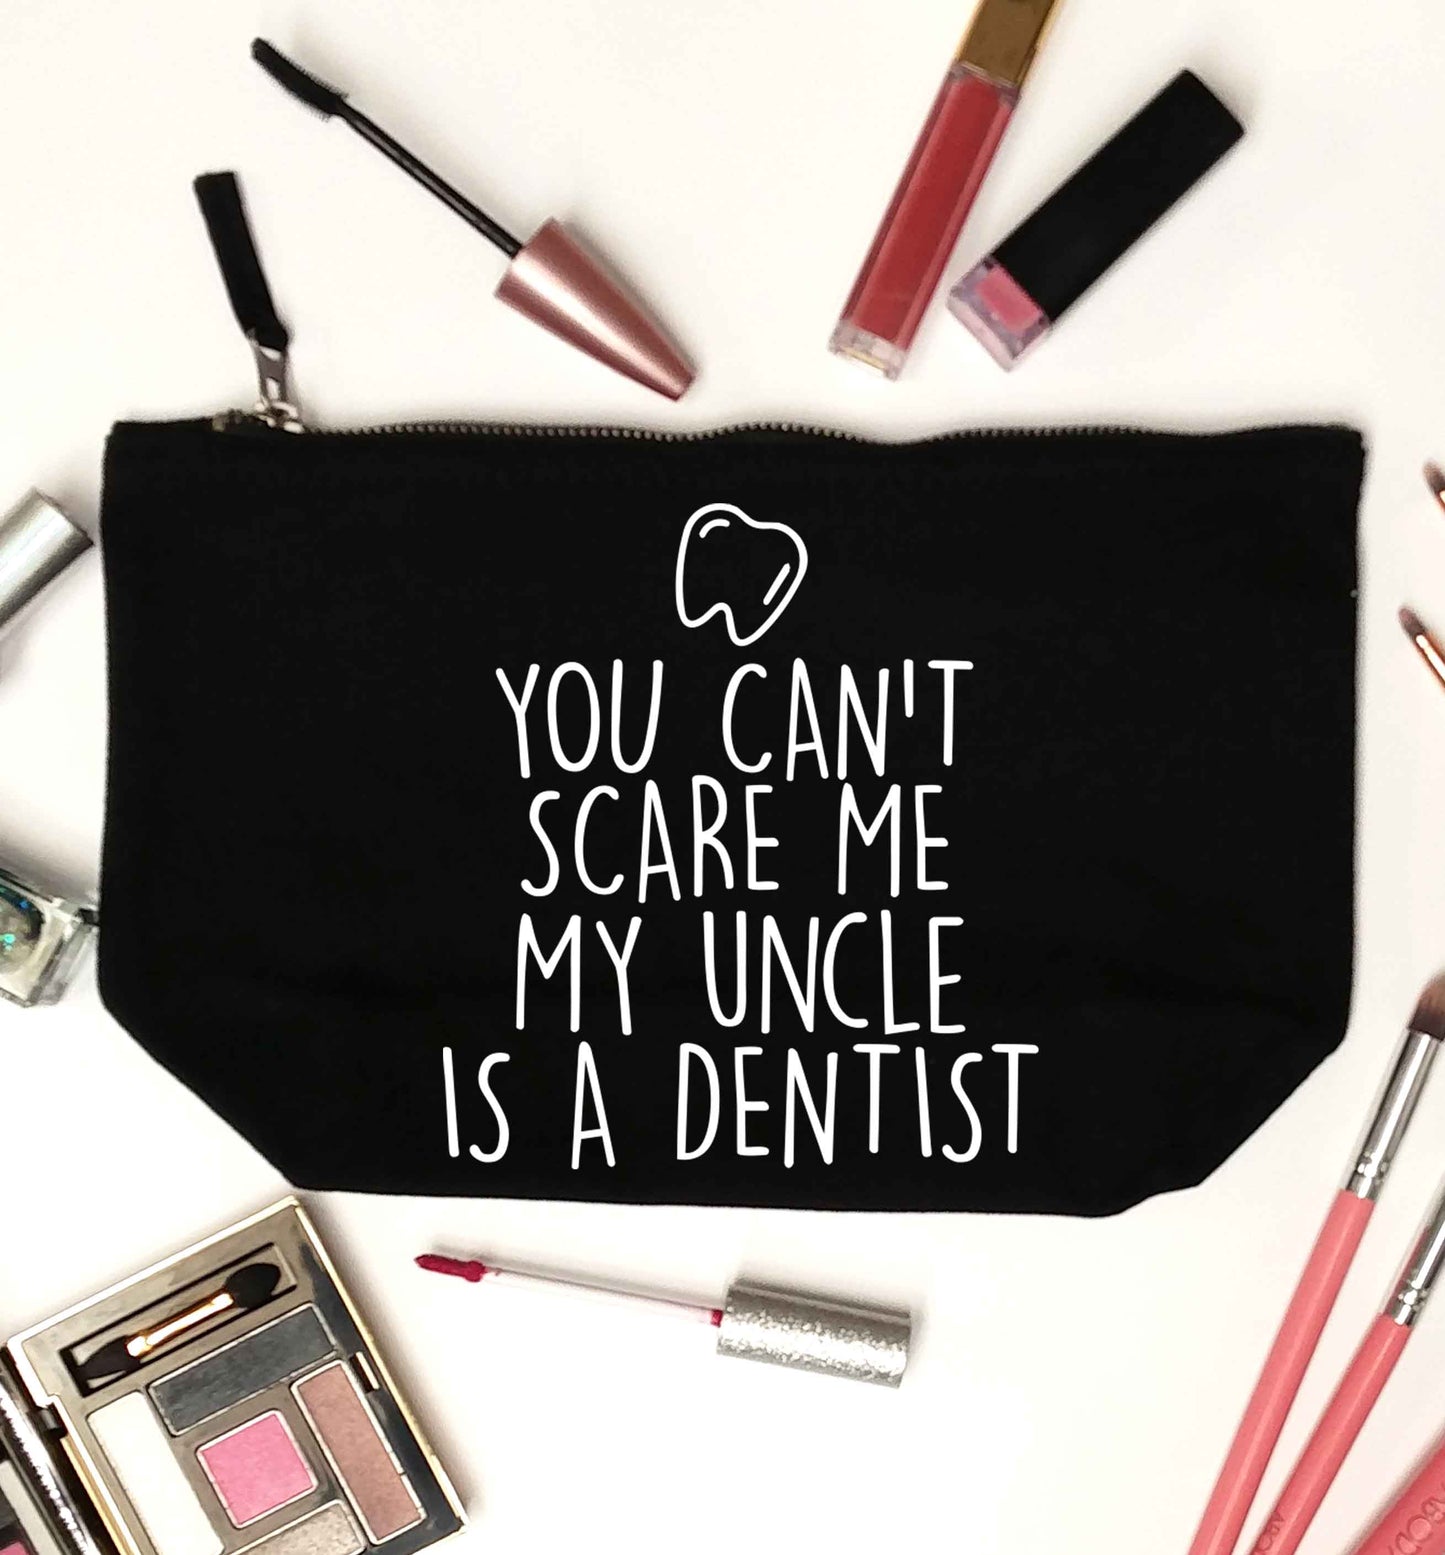 You can't scare me my uncle is a dentist black makeup bag